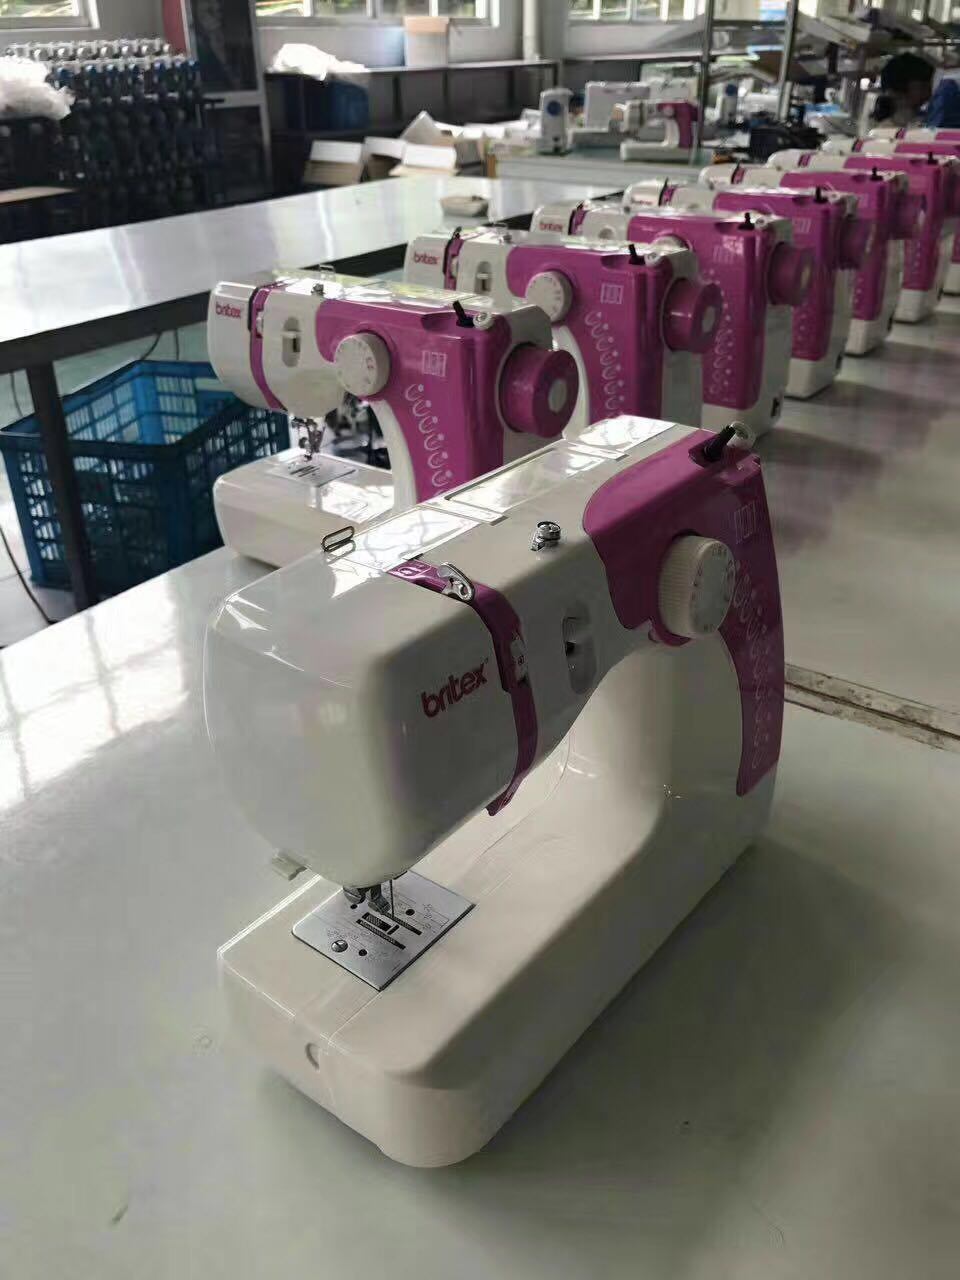 Br-1212 Domestic Household Multi- Function Embroidery Machine